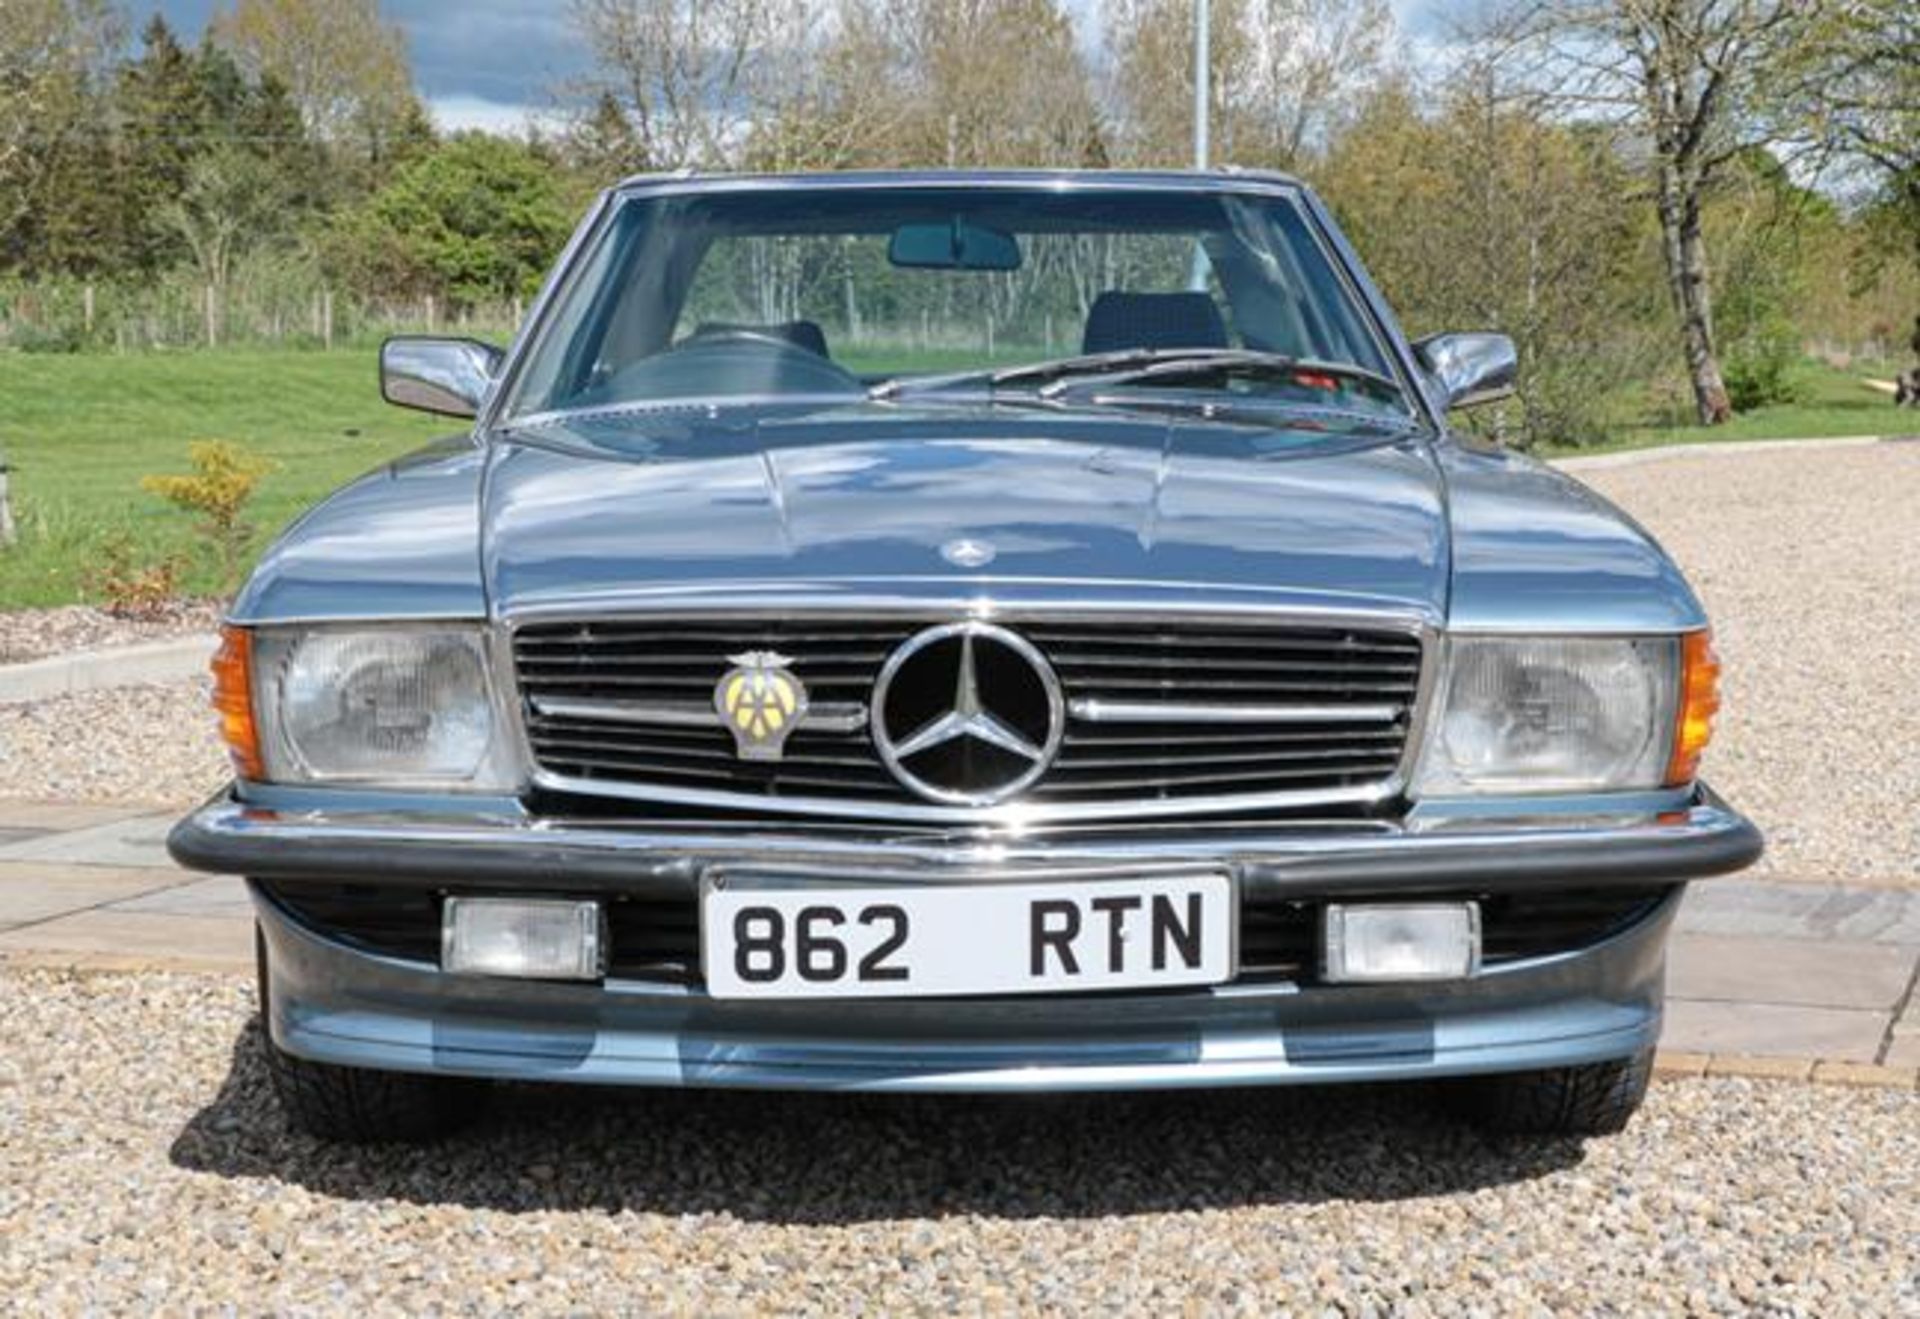 1985 Mercedes 380-SL Auto Convertible Registration number: 862 RTN Date of first registration: 03 01 - Image 2 of 5